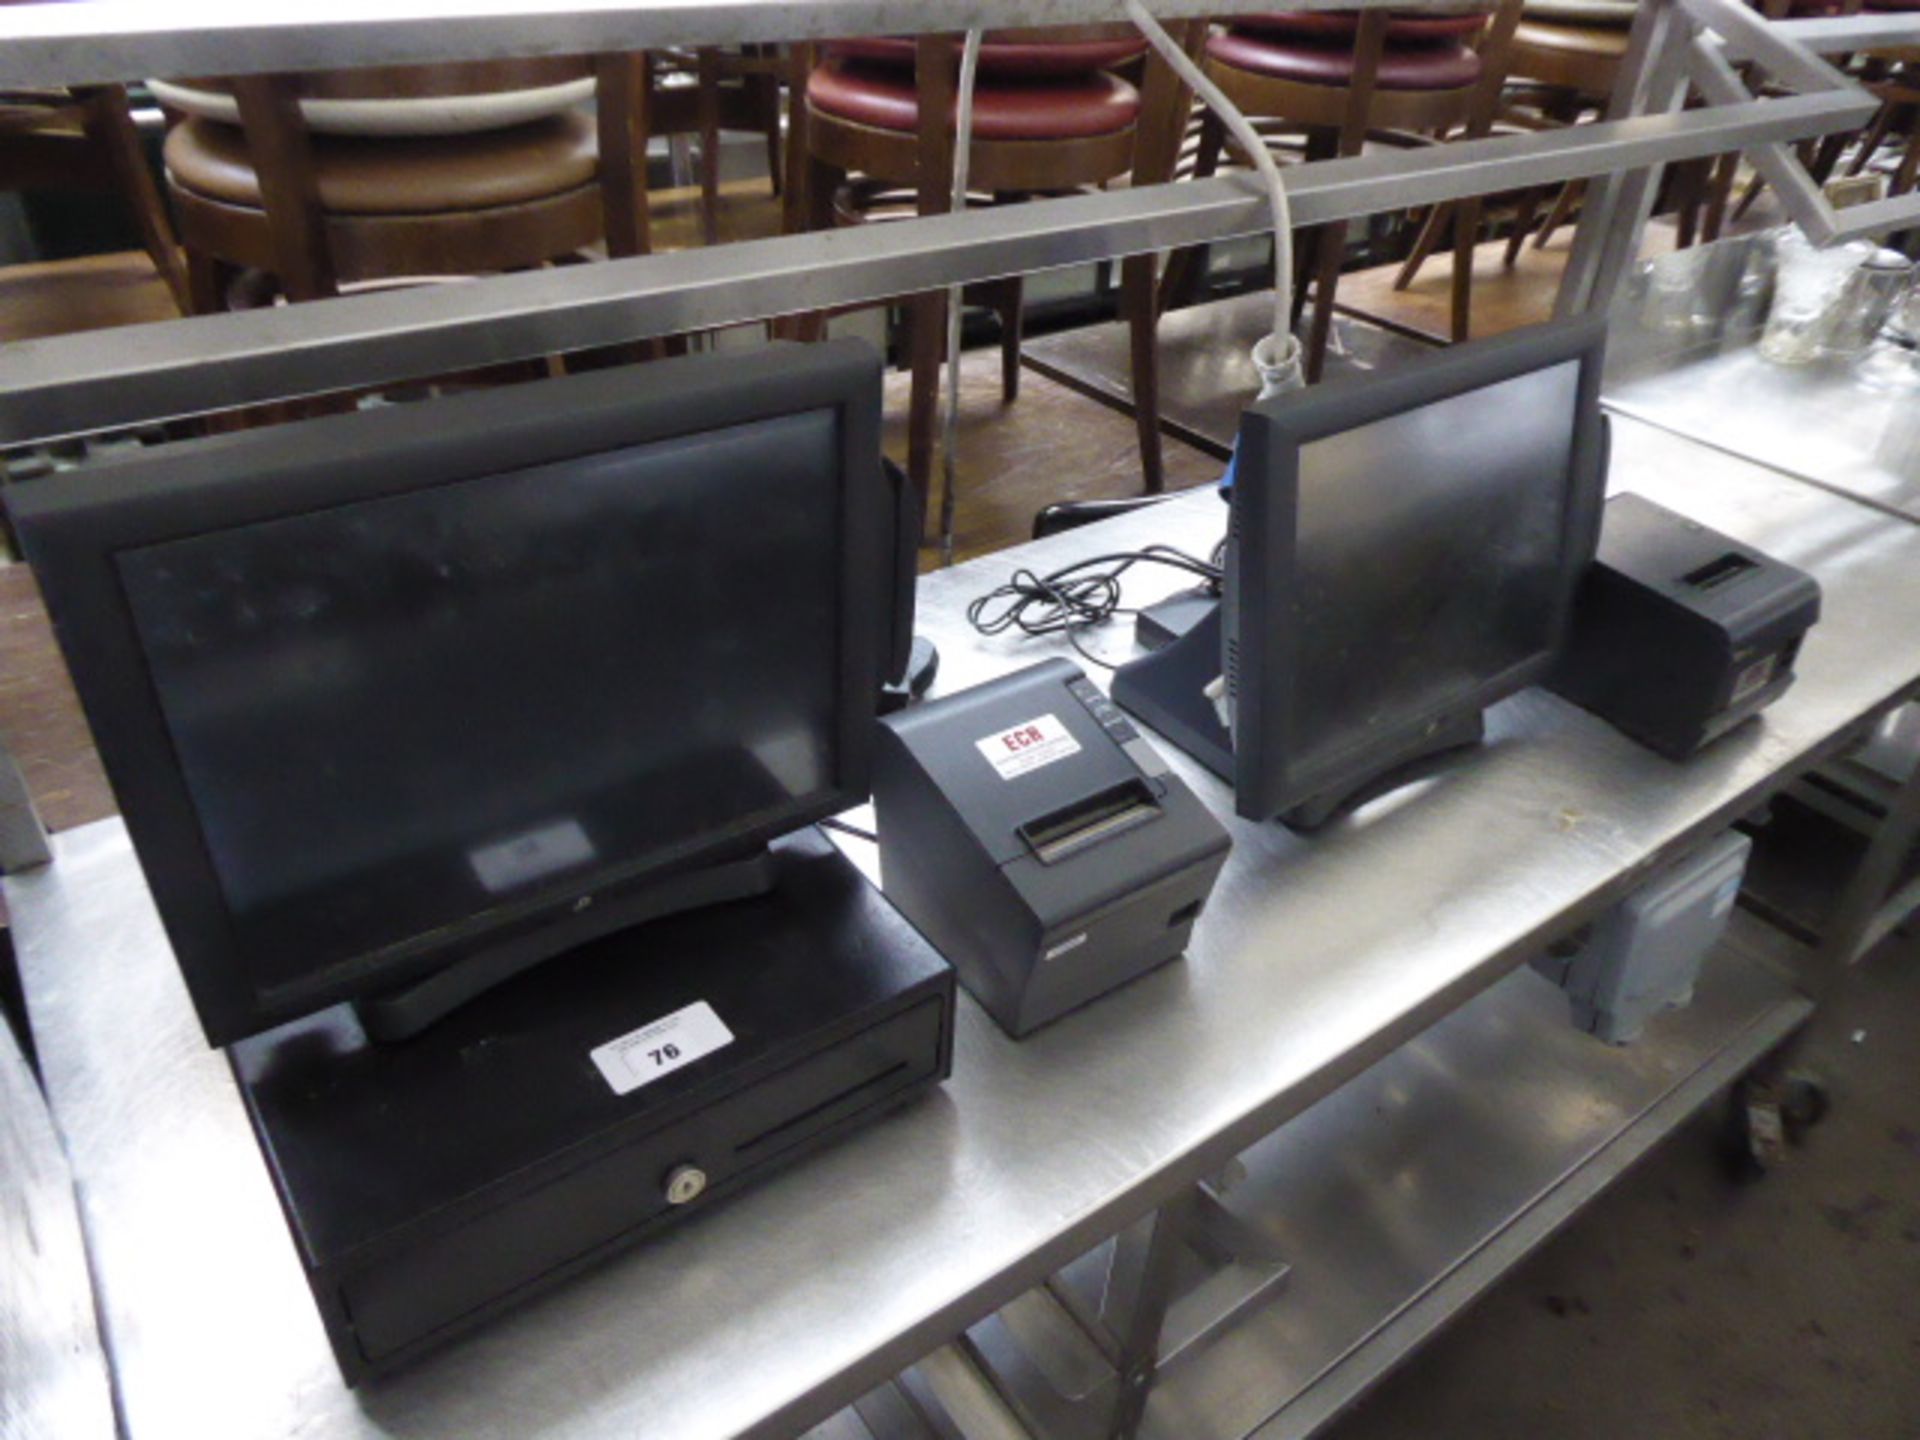 2 J2 electronic touchscreen till stations with 1 cash drawer and 2 printers